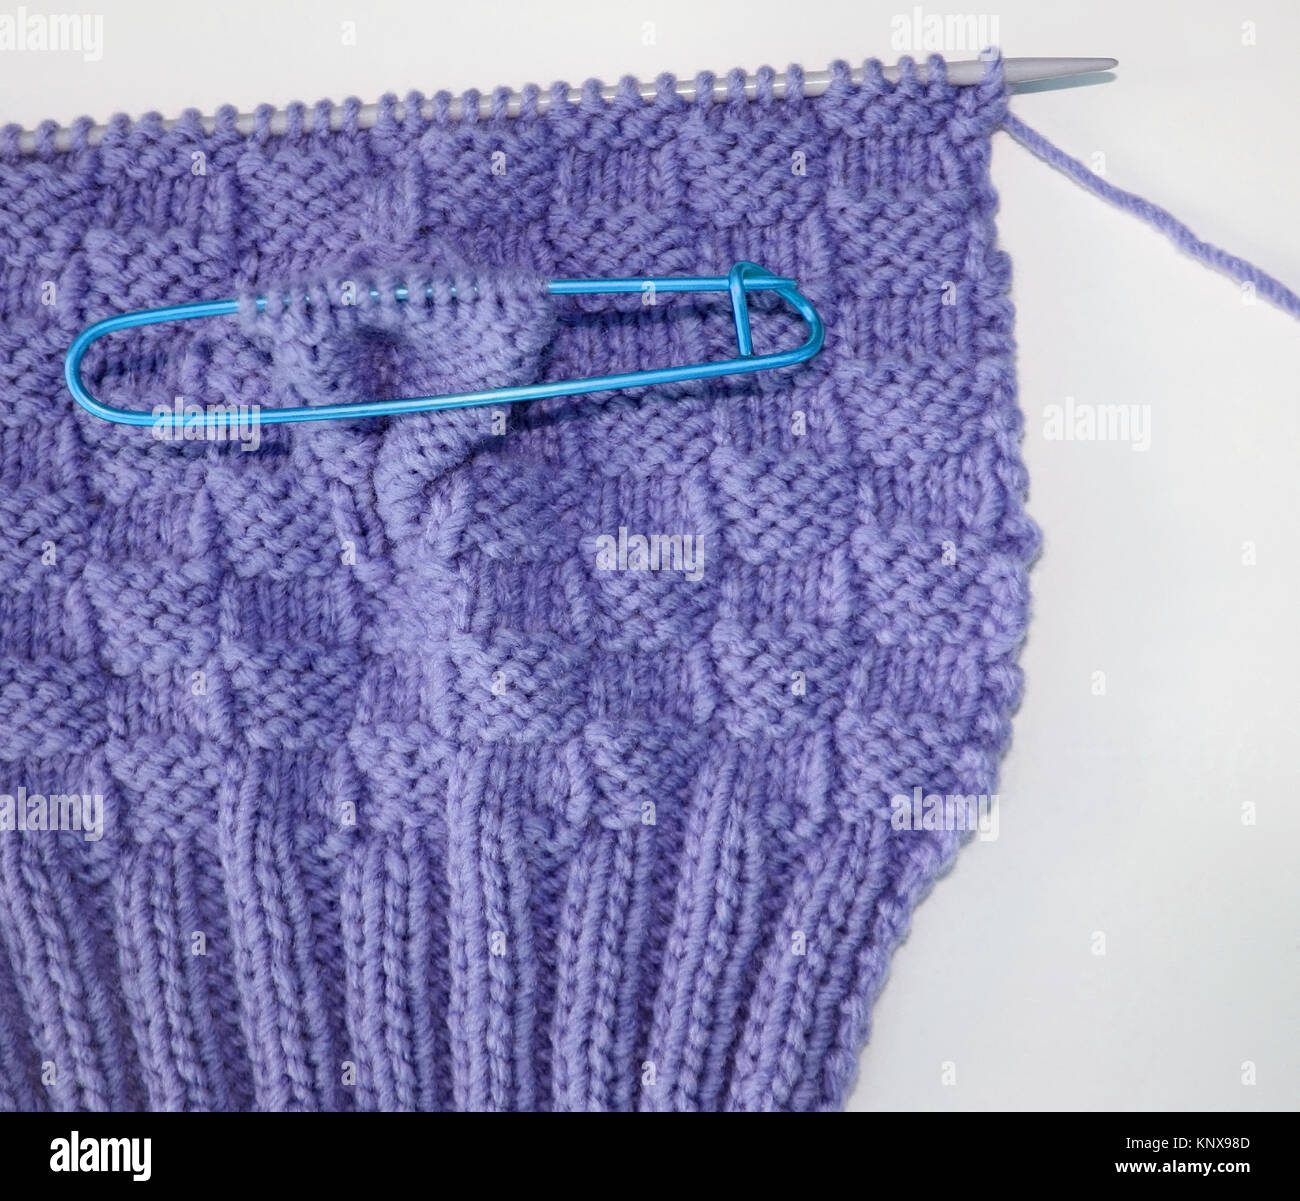 Basket weave pattern knitted on knitting needle in lilac color wool.   Stitch holder in place marking off extra stitches to be knit later Stock Photo